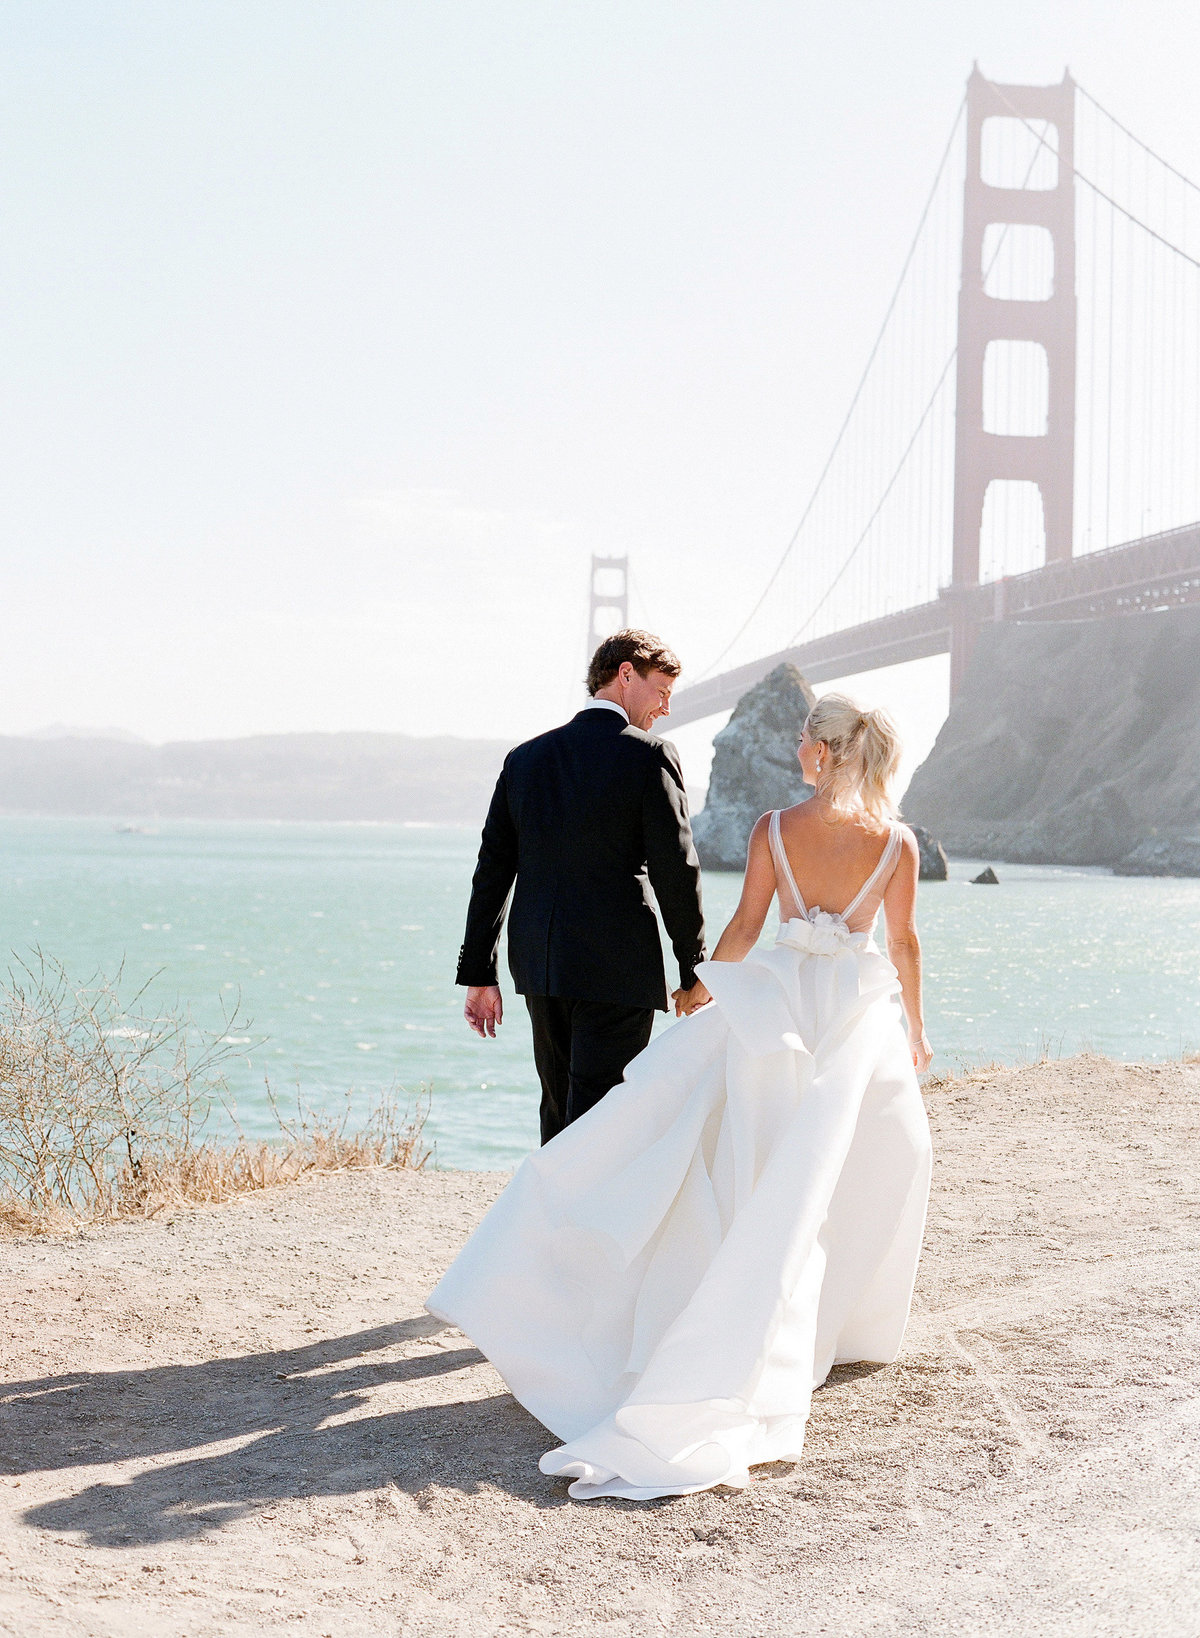 Wedding by Jenny Schneider Events at Cavallo Point luxury resort in Sausalito in Marin County, California. Photo by Lacie Hansen Photography.